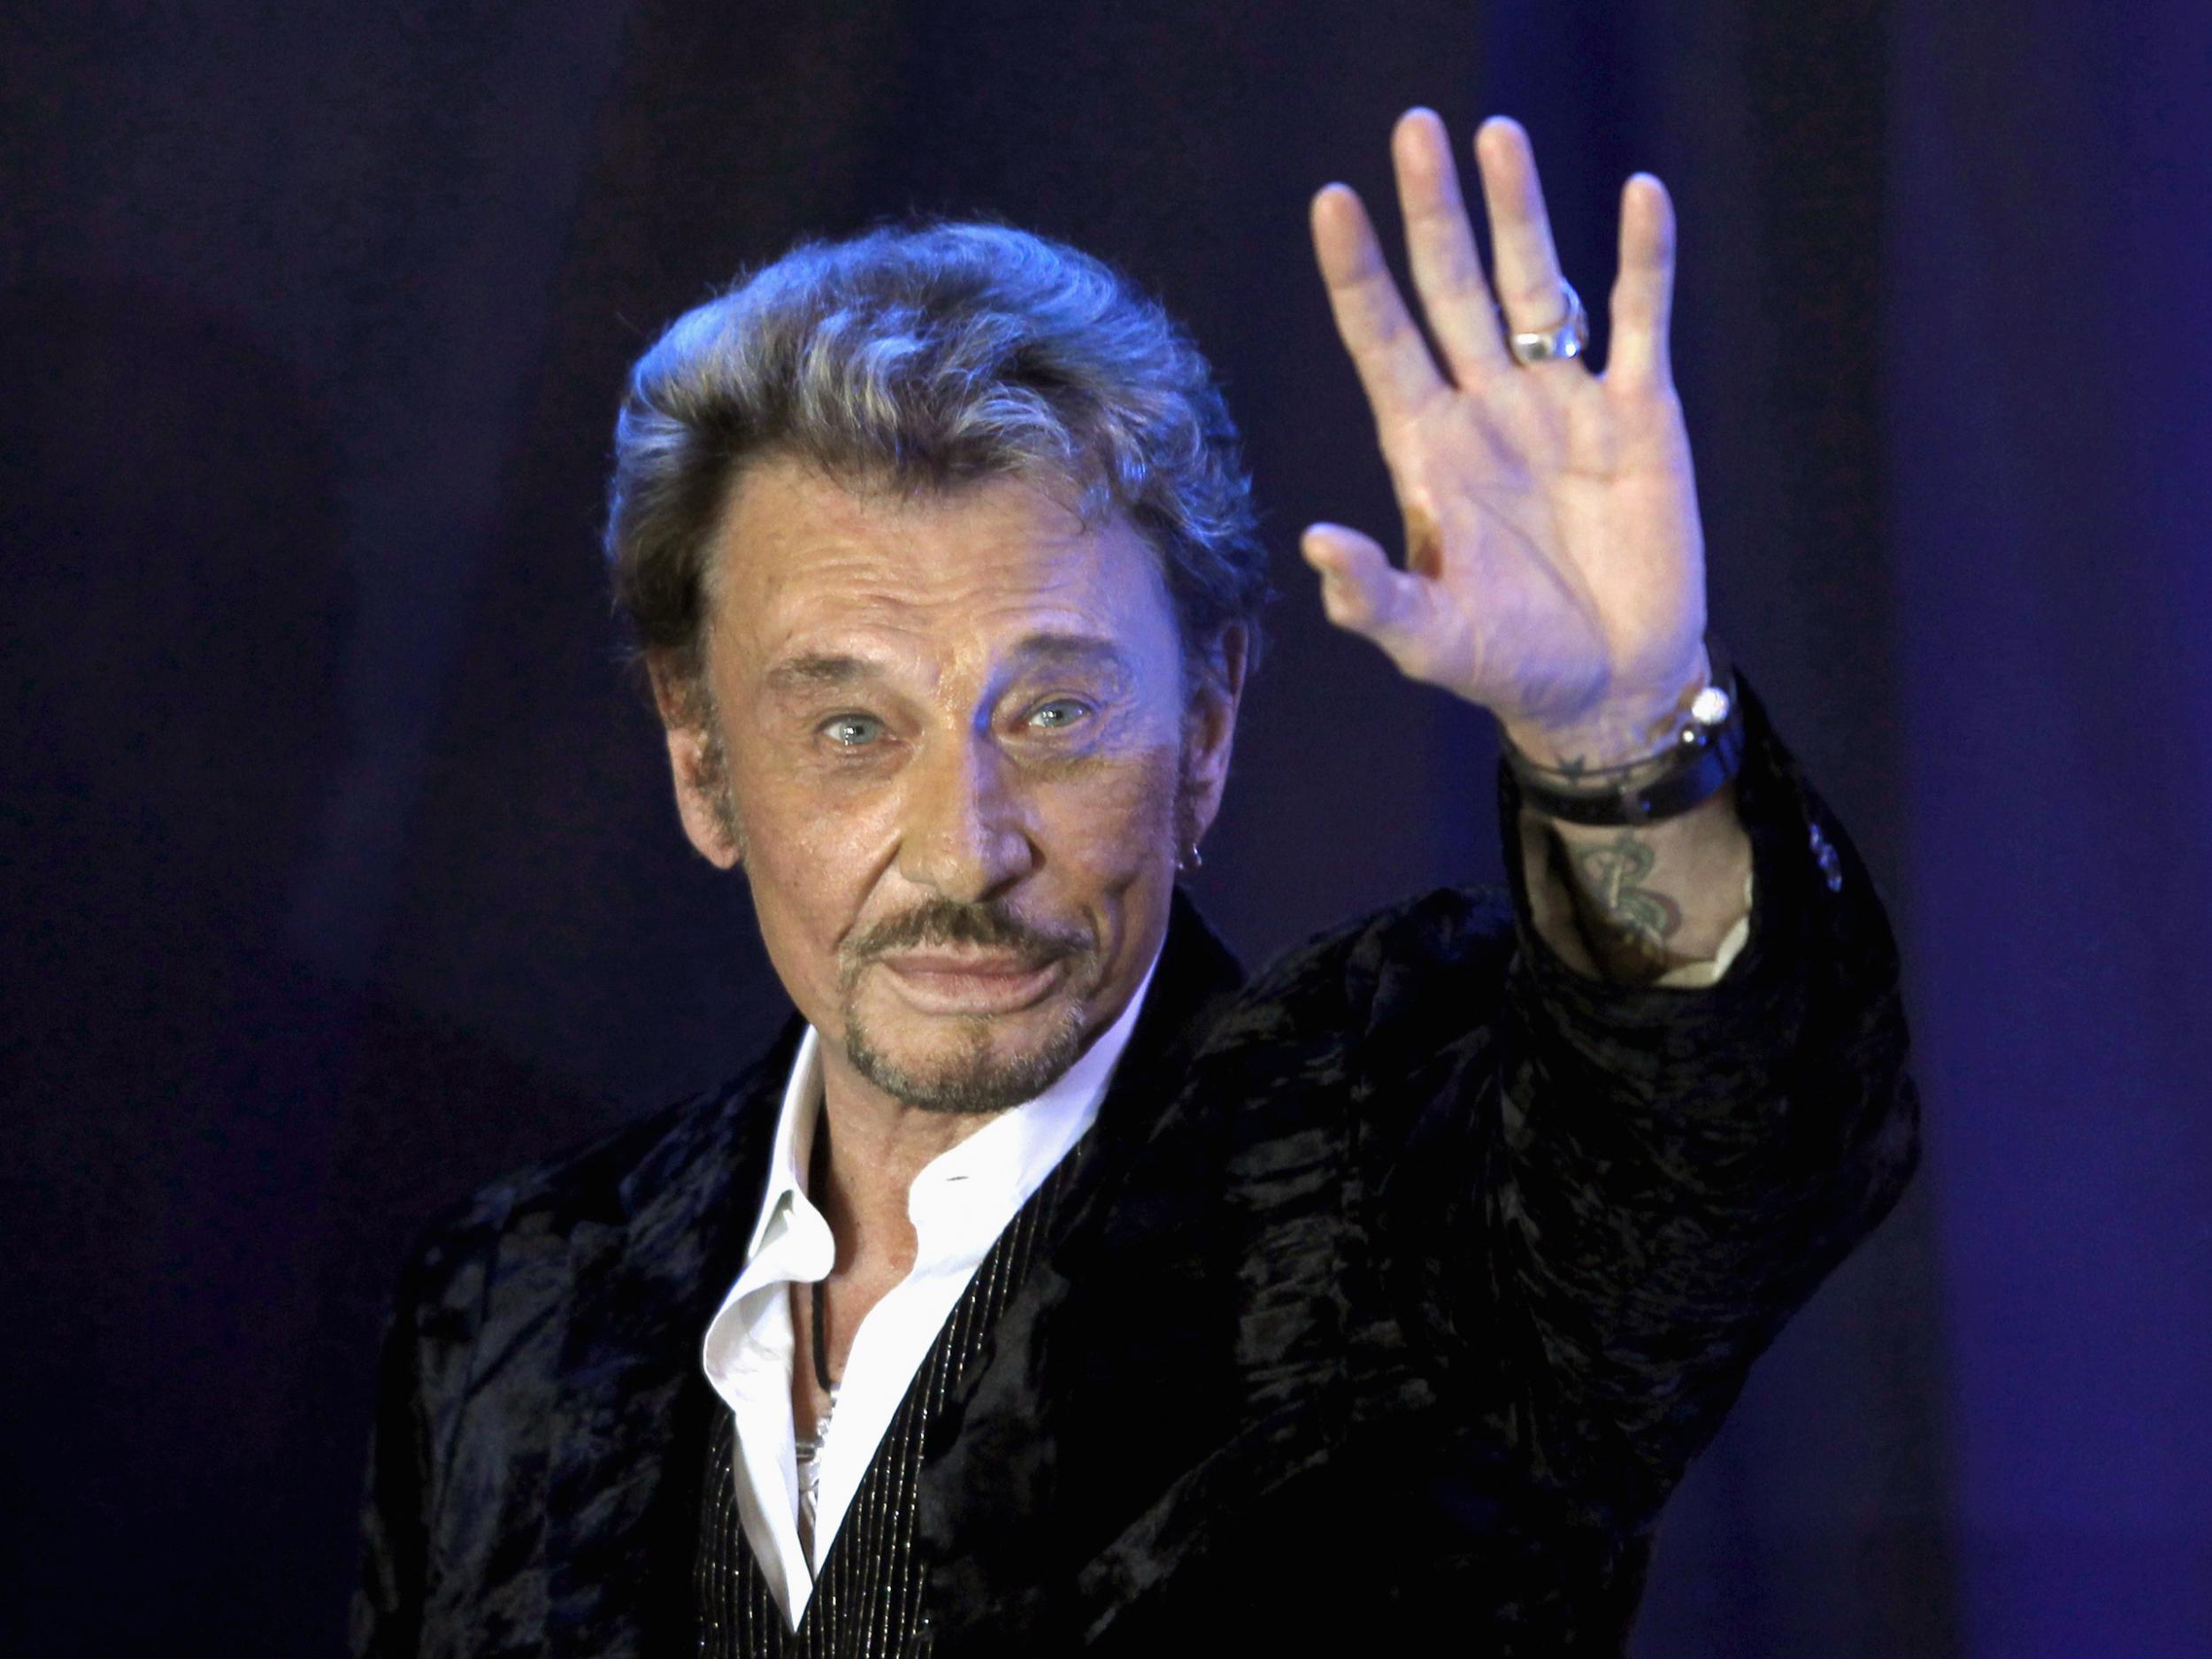 French singer Johnny Hallyday, who has died aged 74